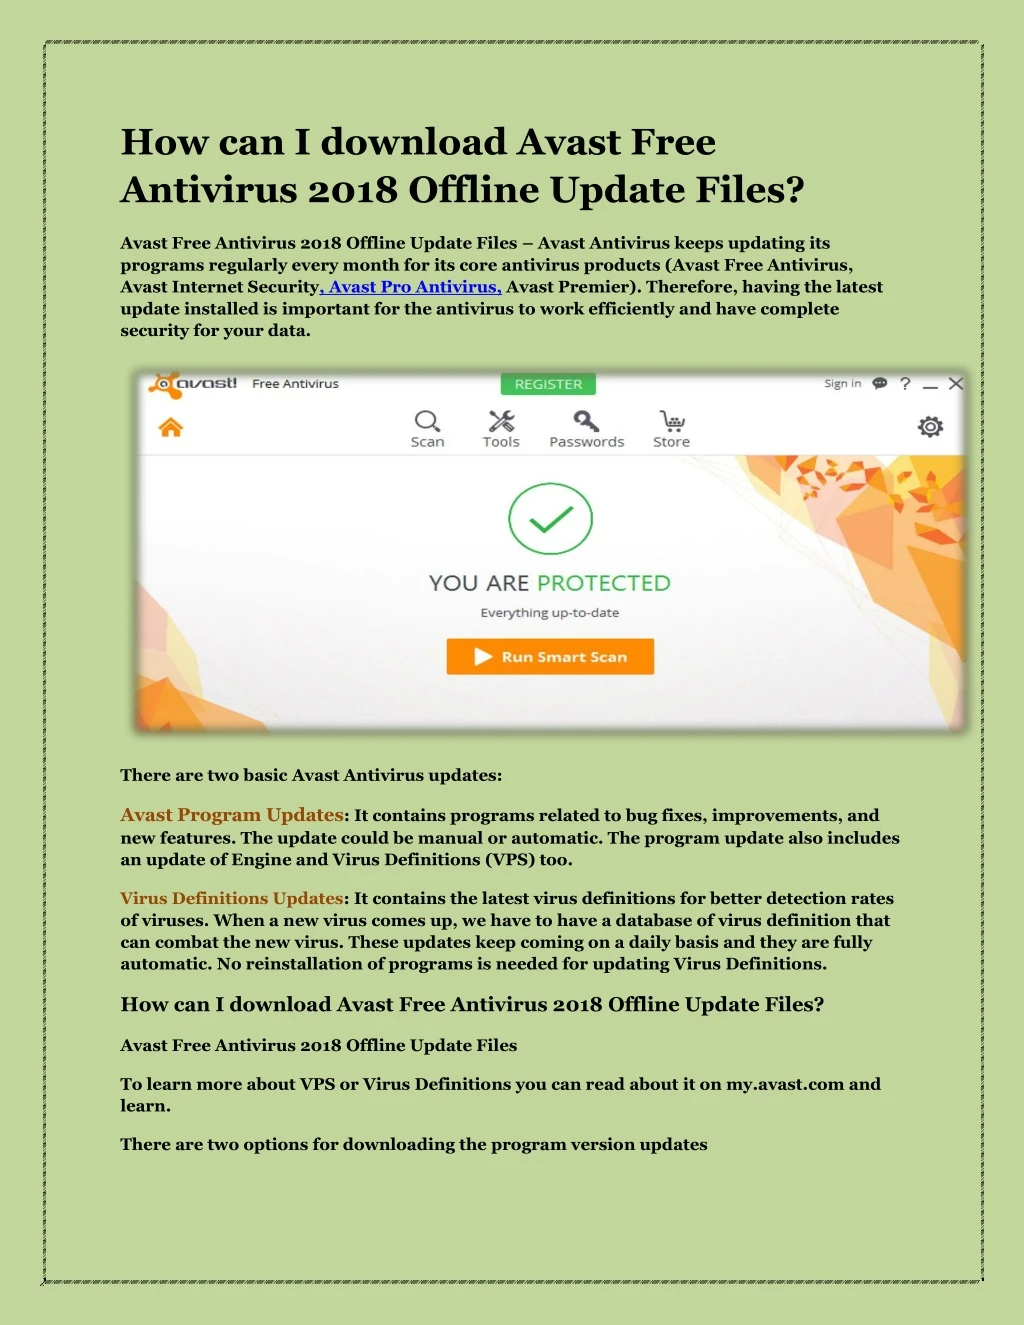 how can i download avast free antivirus 2018